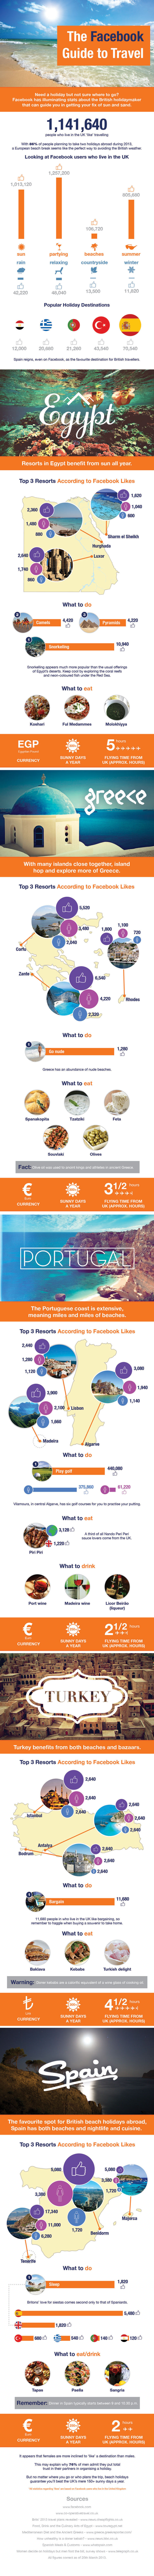 A Facebook Guide to Travel Infographic